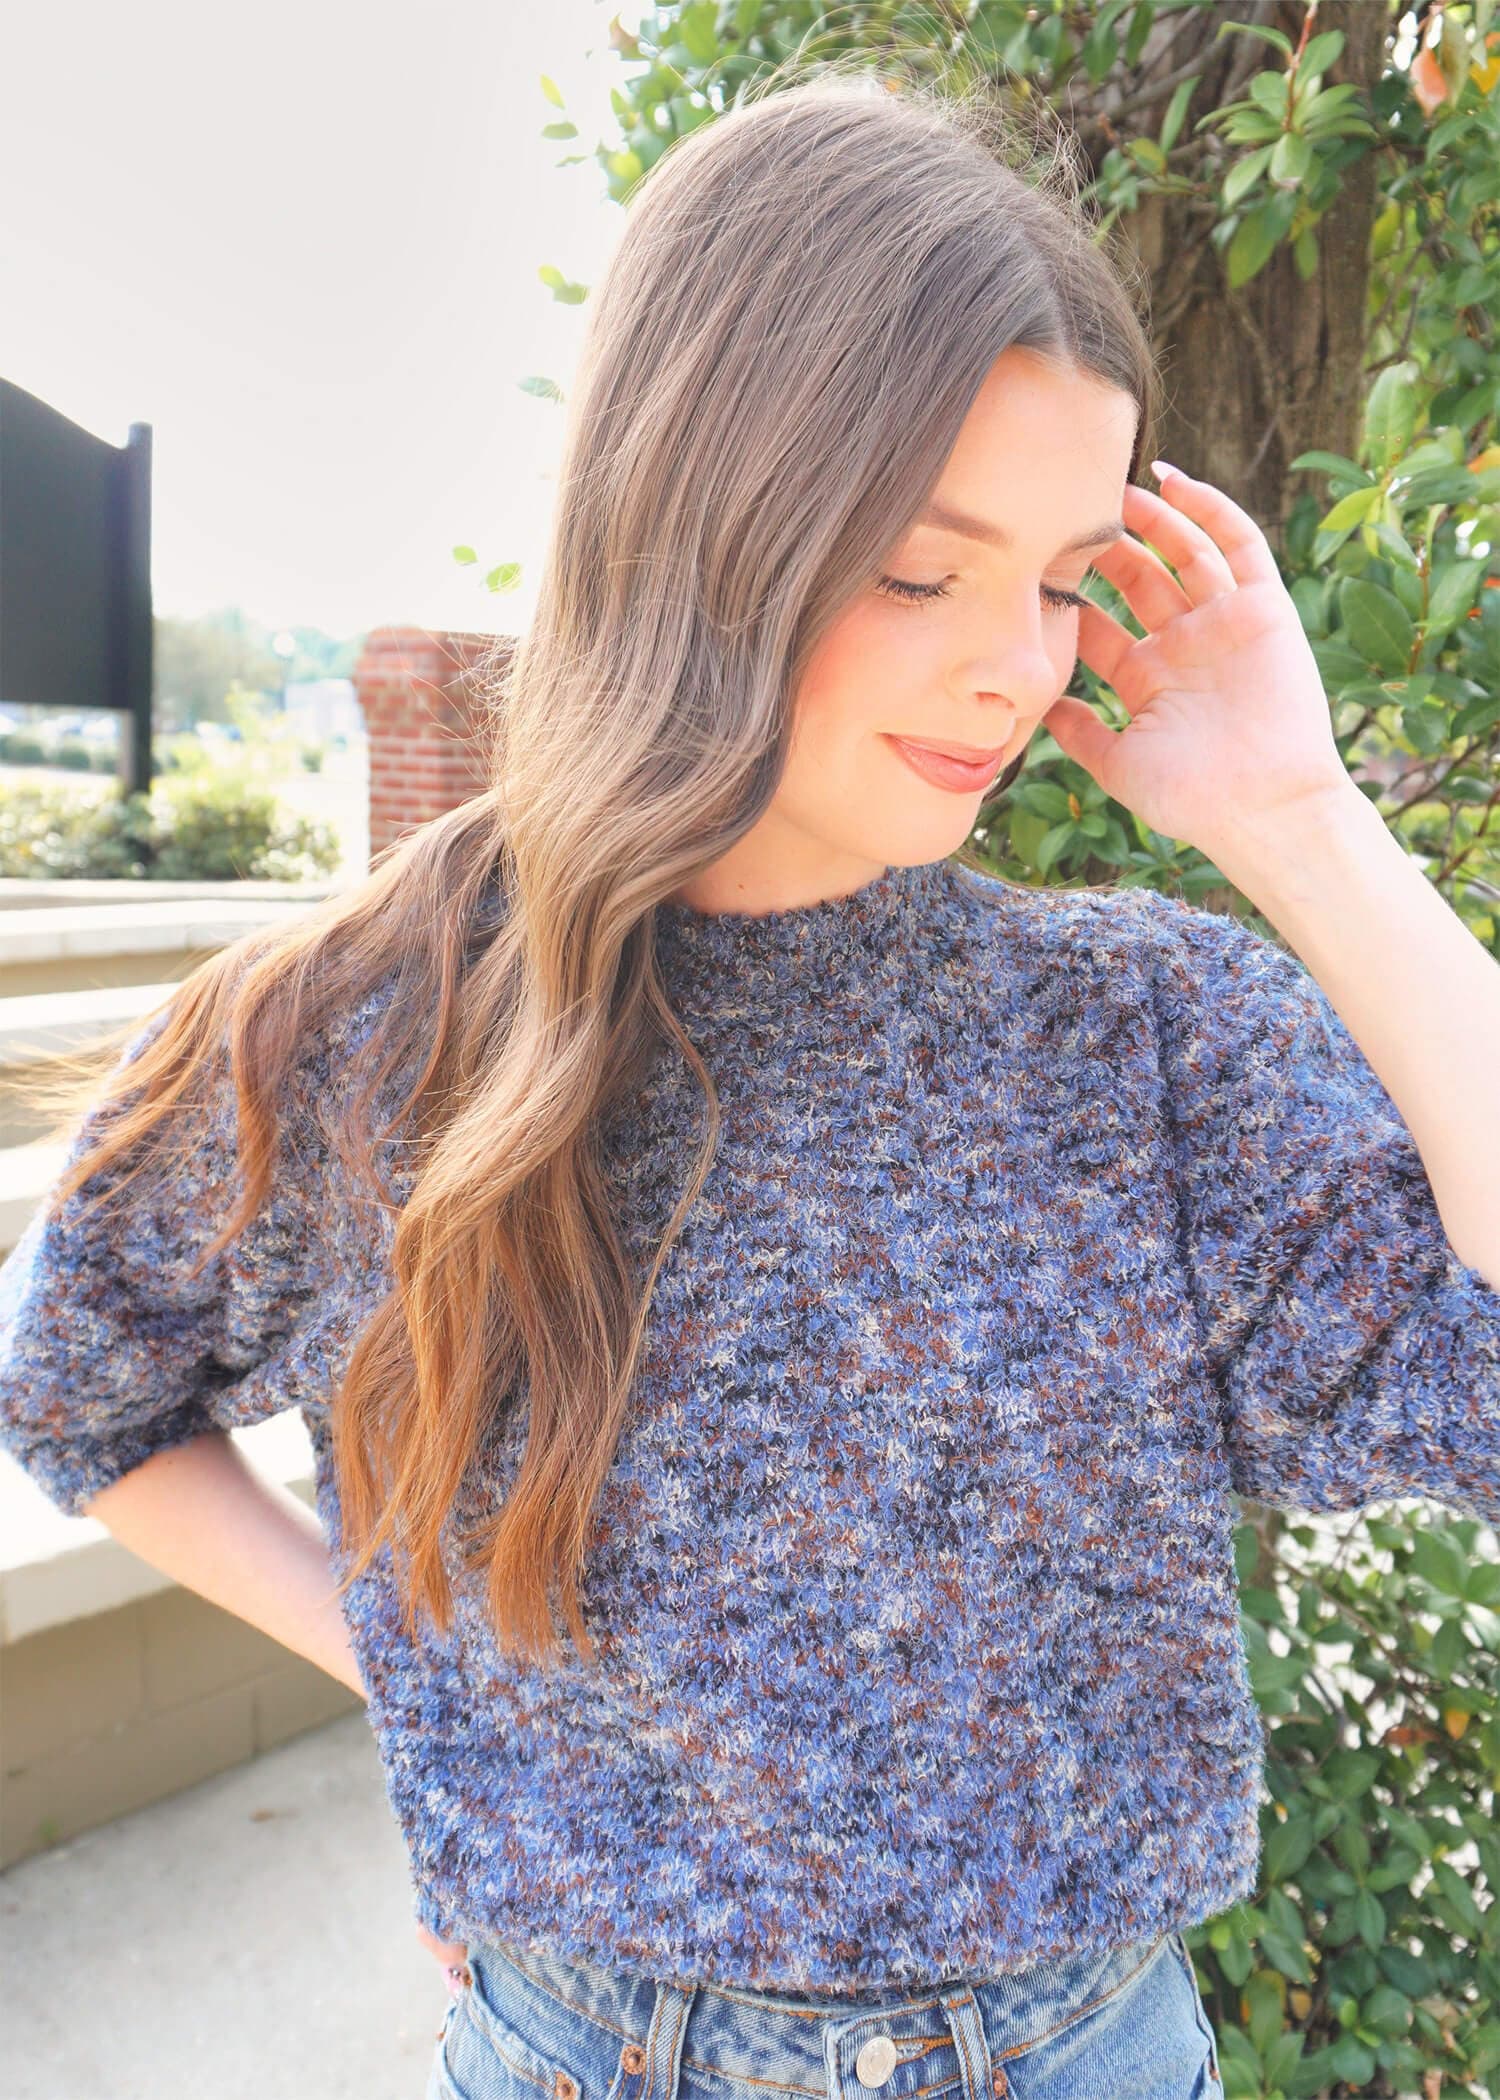 In Your Dreams Sweater - Blue Marine Sweater MerciGrace Boutique.